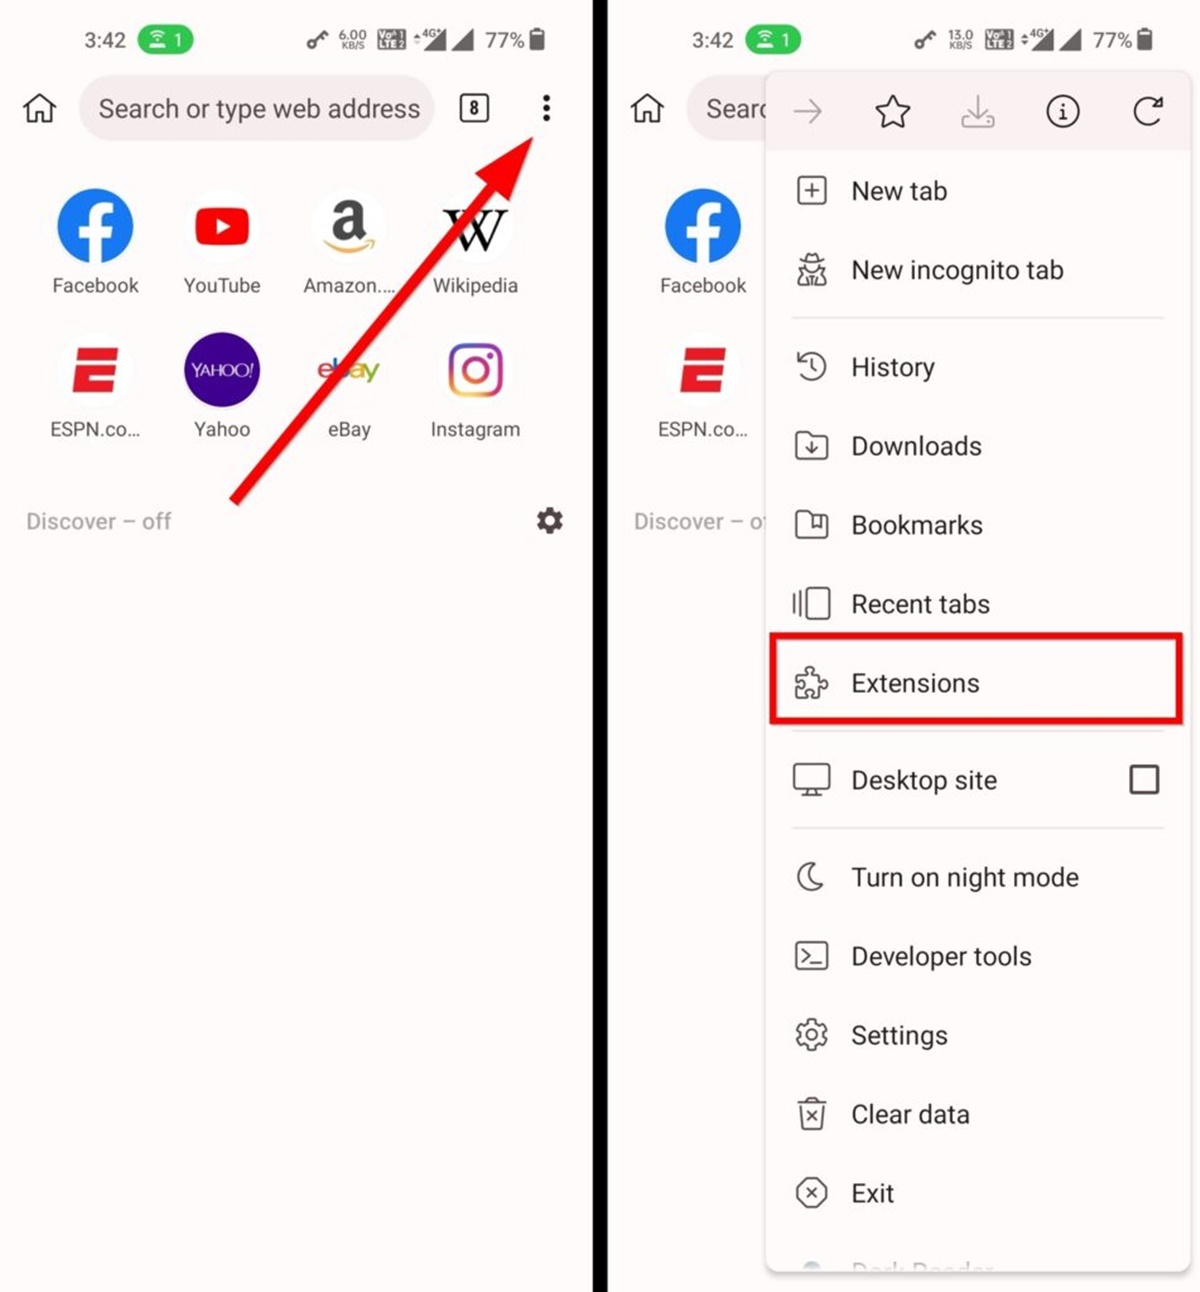 How To Use The Chrome To Phone Extension